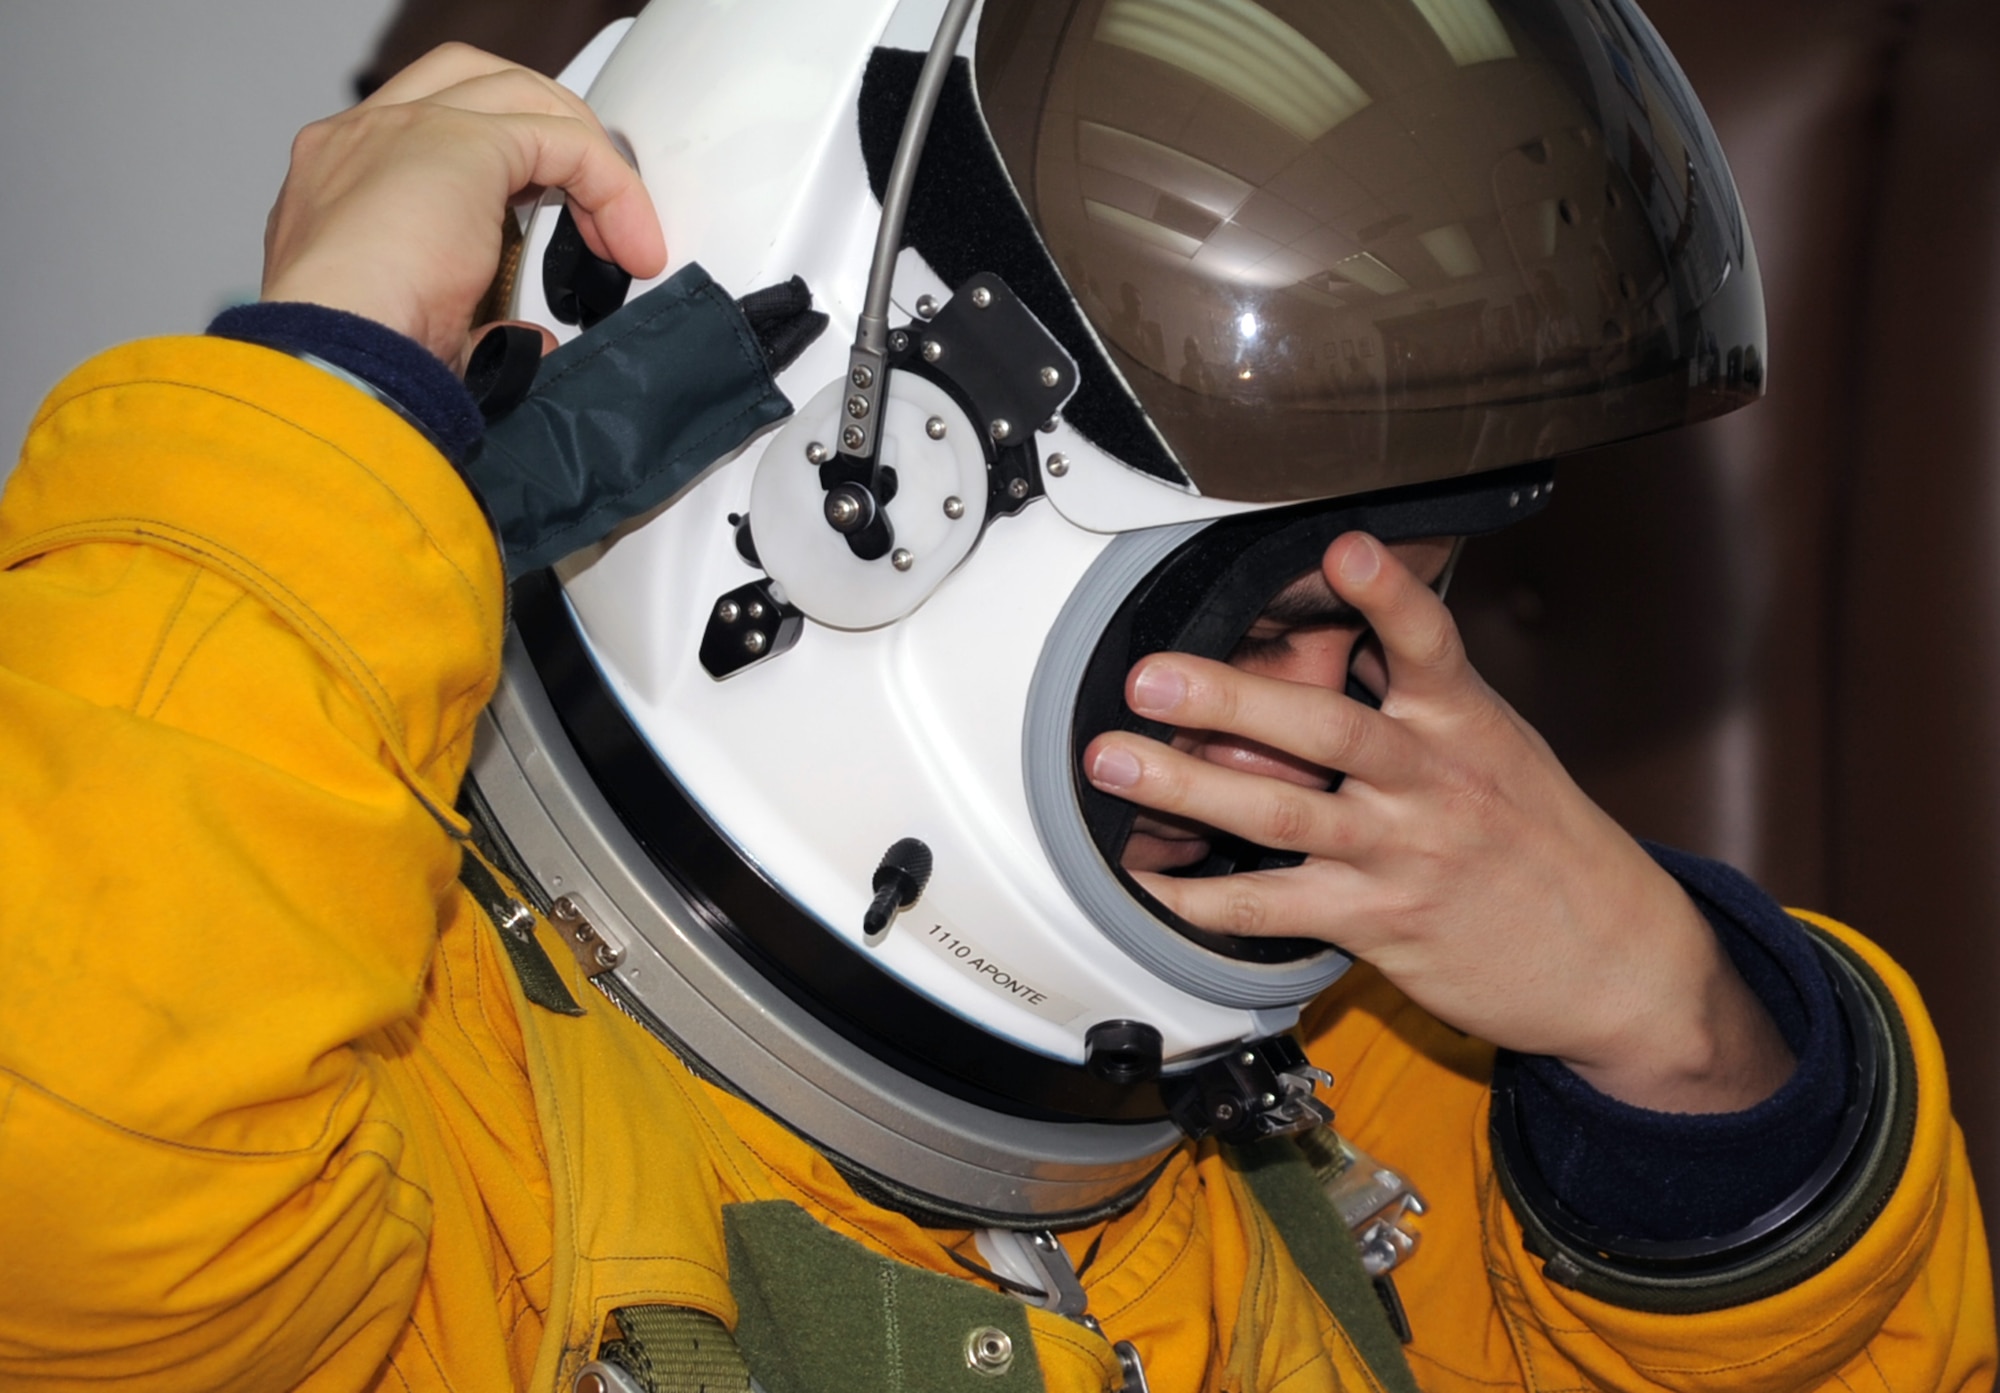 Capt. Tony Aponte, U-2 Dragon Lady pilot with the 99th Expeditionary Reconnaissance Squadron at a non-disclosed location in Southwest Asia, suits up prior to a mission on Jan. 23, 2010.  Because the U-2 flies as high an altitude as 70,000 feet, pilots are required to wear a special suit to complete their mission.  The 99th ERS, part of the 380th Air Expeditionary Wing, supports Operations Iraqi Freedom and Enduring Freedom and the Combined Joint Task Force-Horn of Africa. (U.S. Air Force Photo/Tech. Sgt. Scott T. Sturkol/Released)